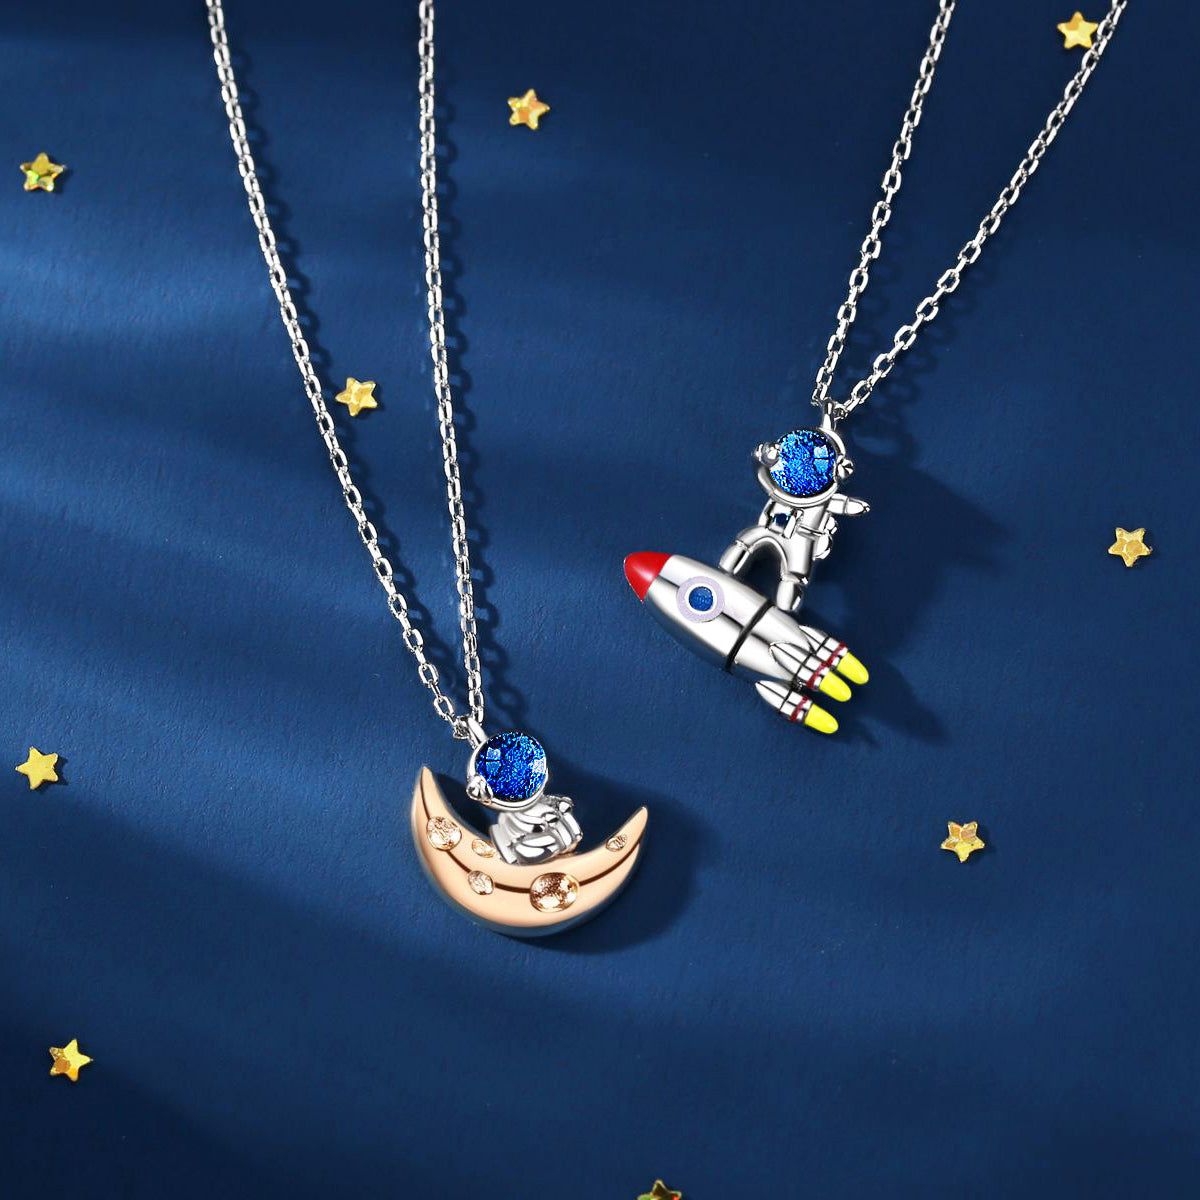 Astronaut S925 Silver Matching Necklaces 